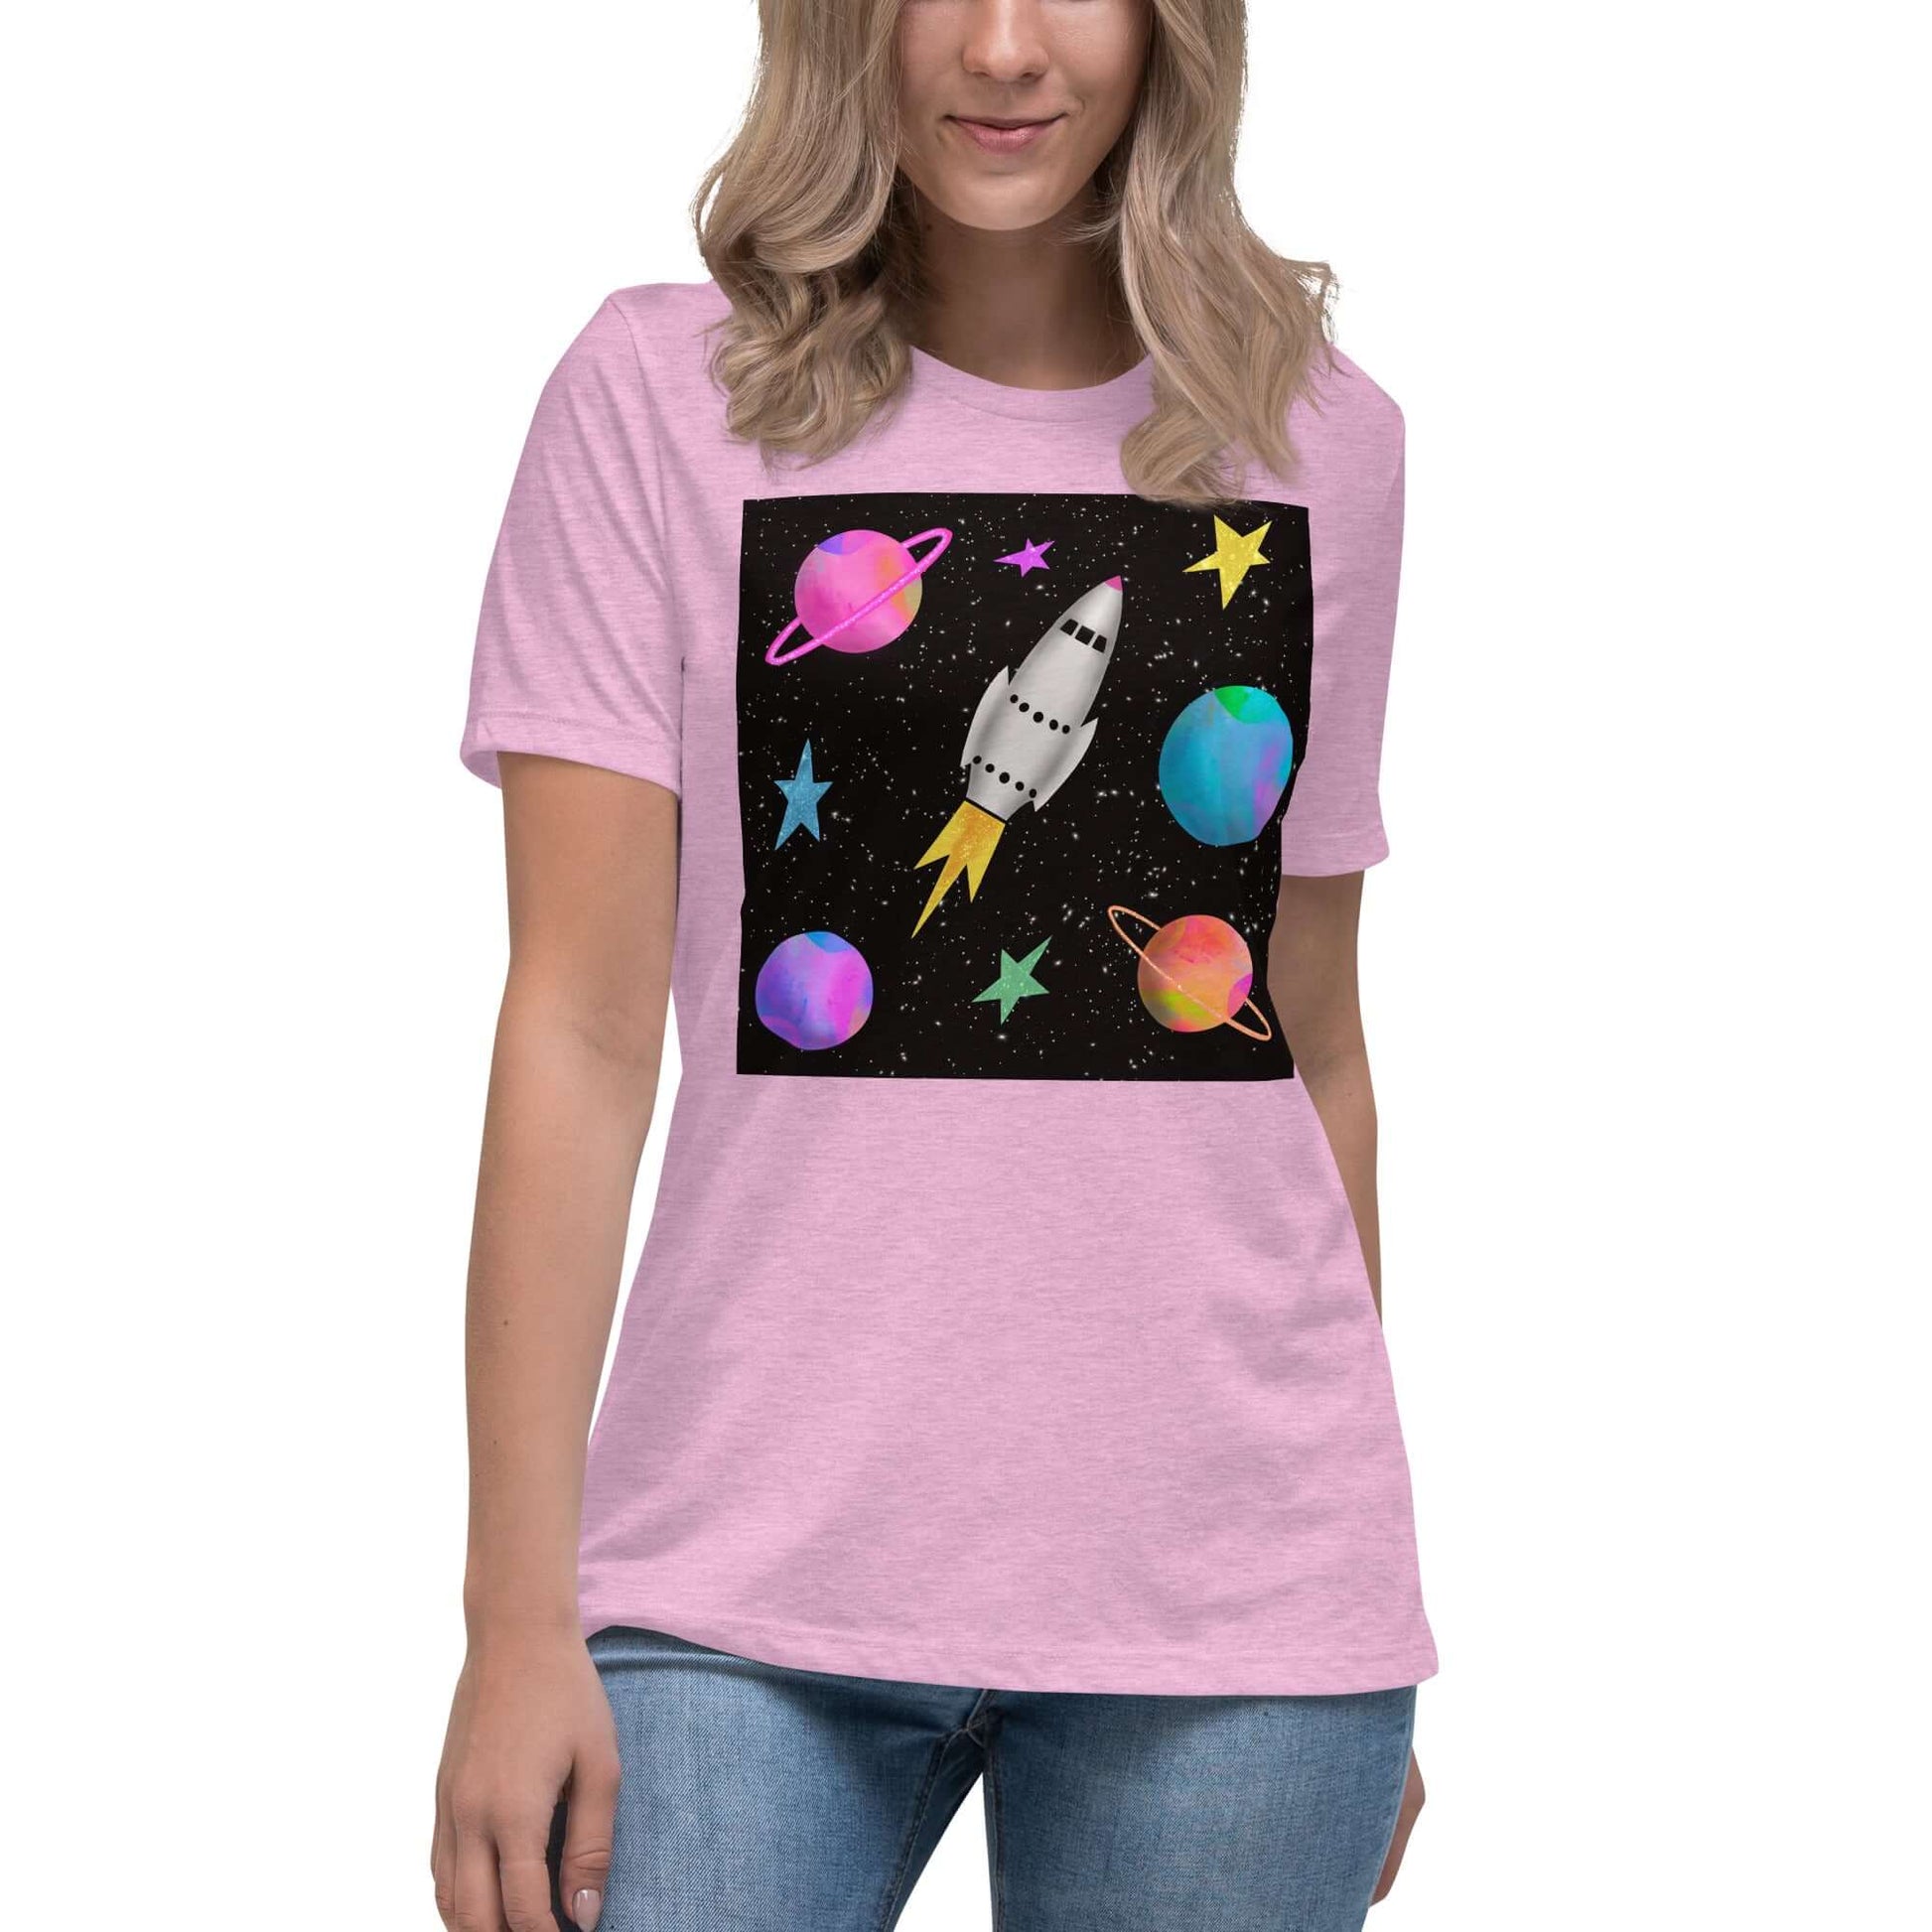 Rocket with Colorful Stars and Planets “Space Rockets” Women’s Short Sleeve Tee in Heather Prism Lilac